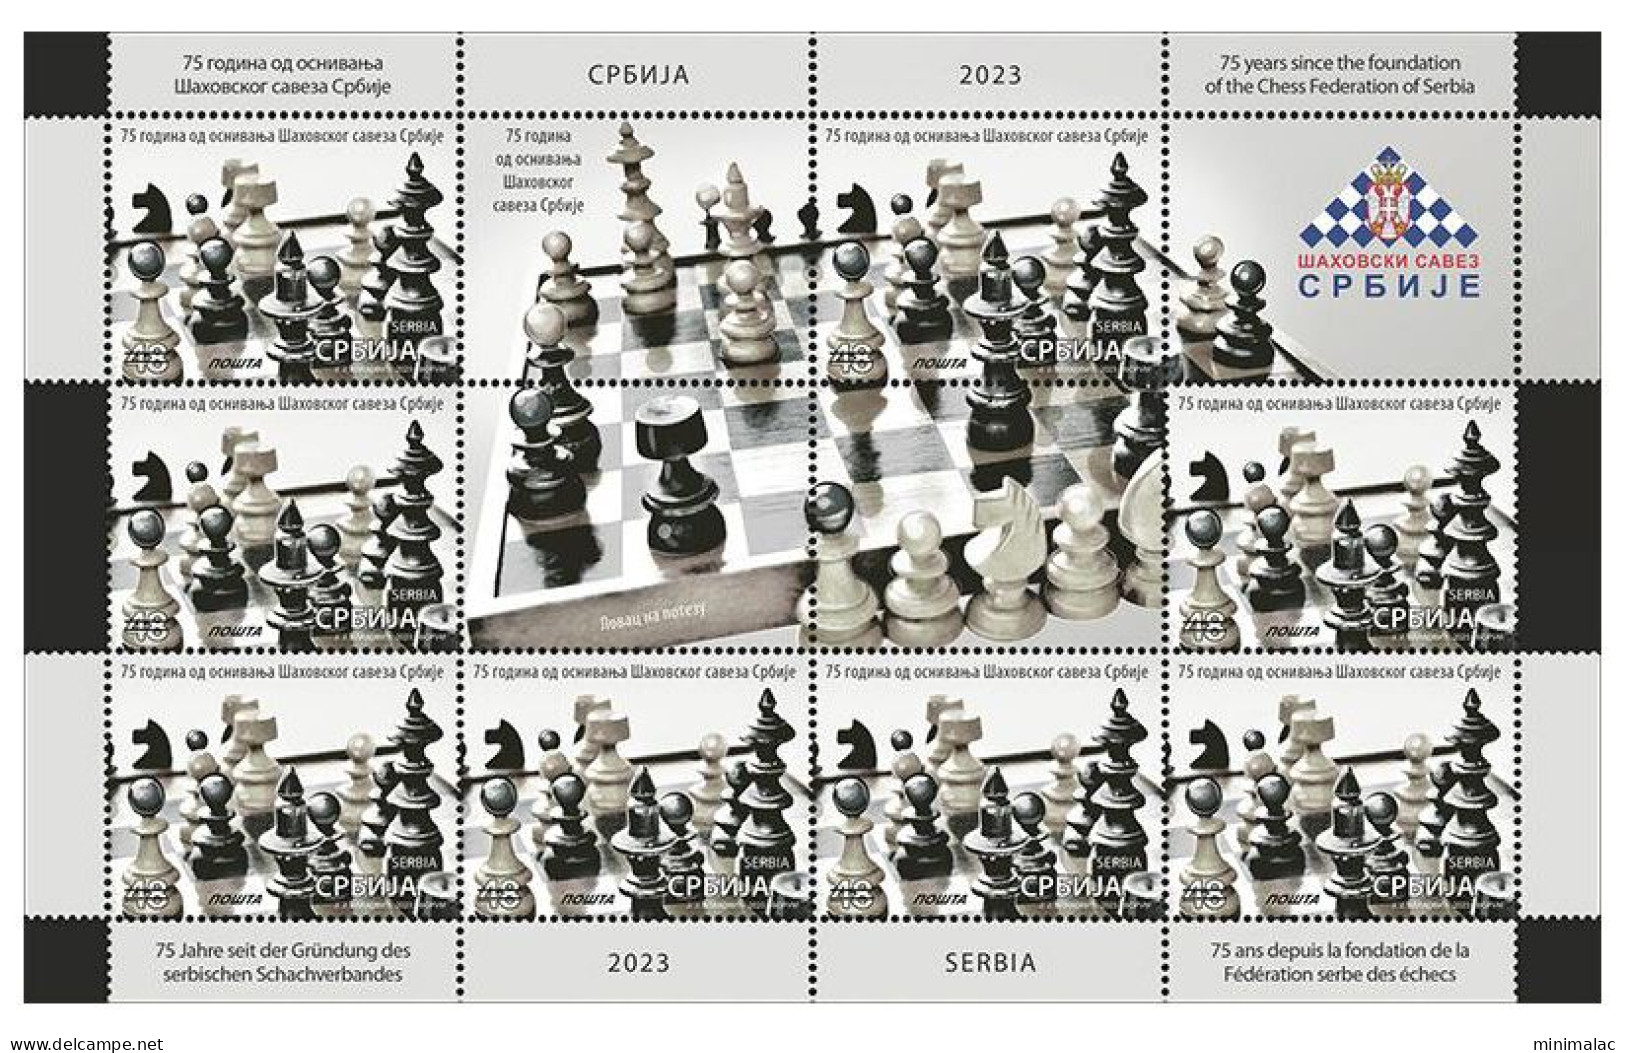 Serbia 2023. 75 Years Since The Foundation Of The Chess Federation Of Serbia, Mini Sheet, MNH - Serbie